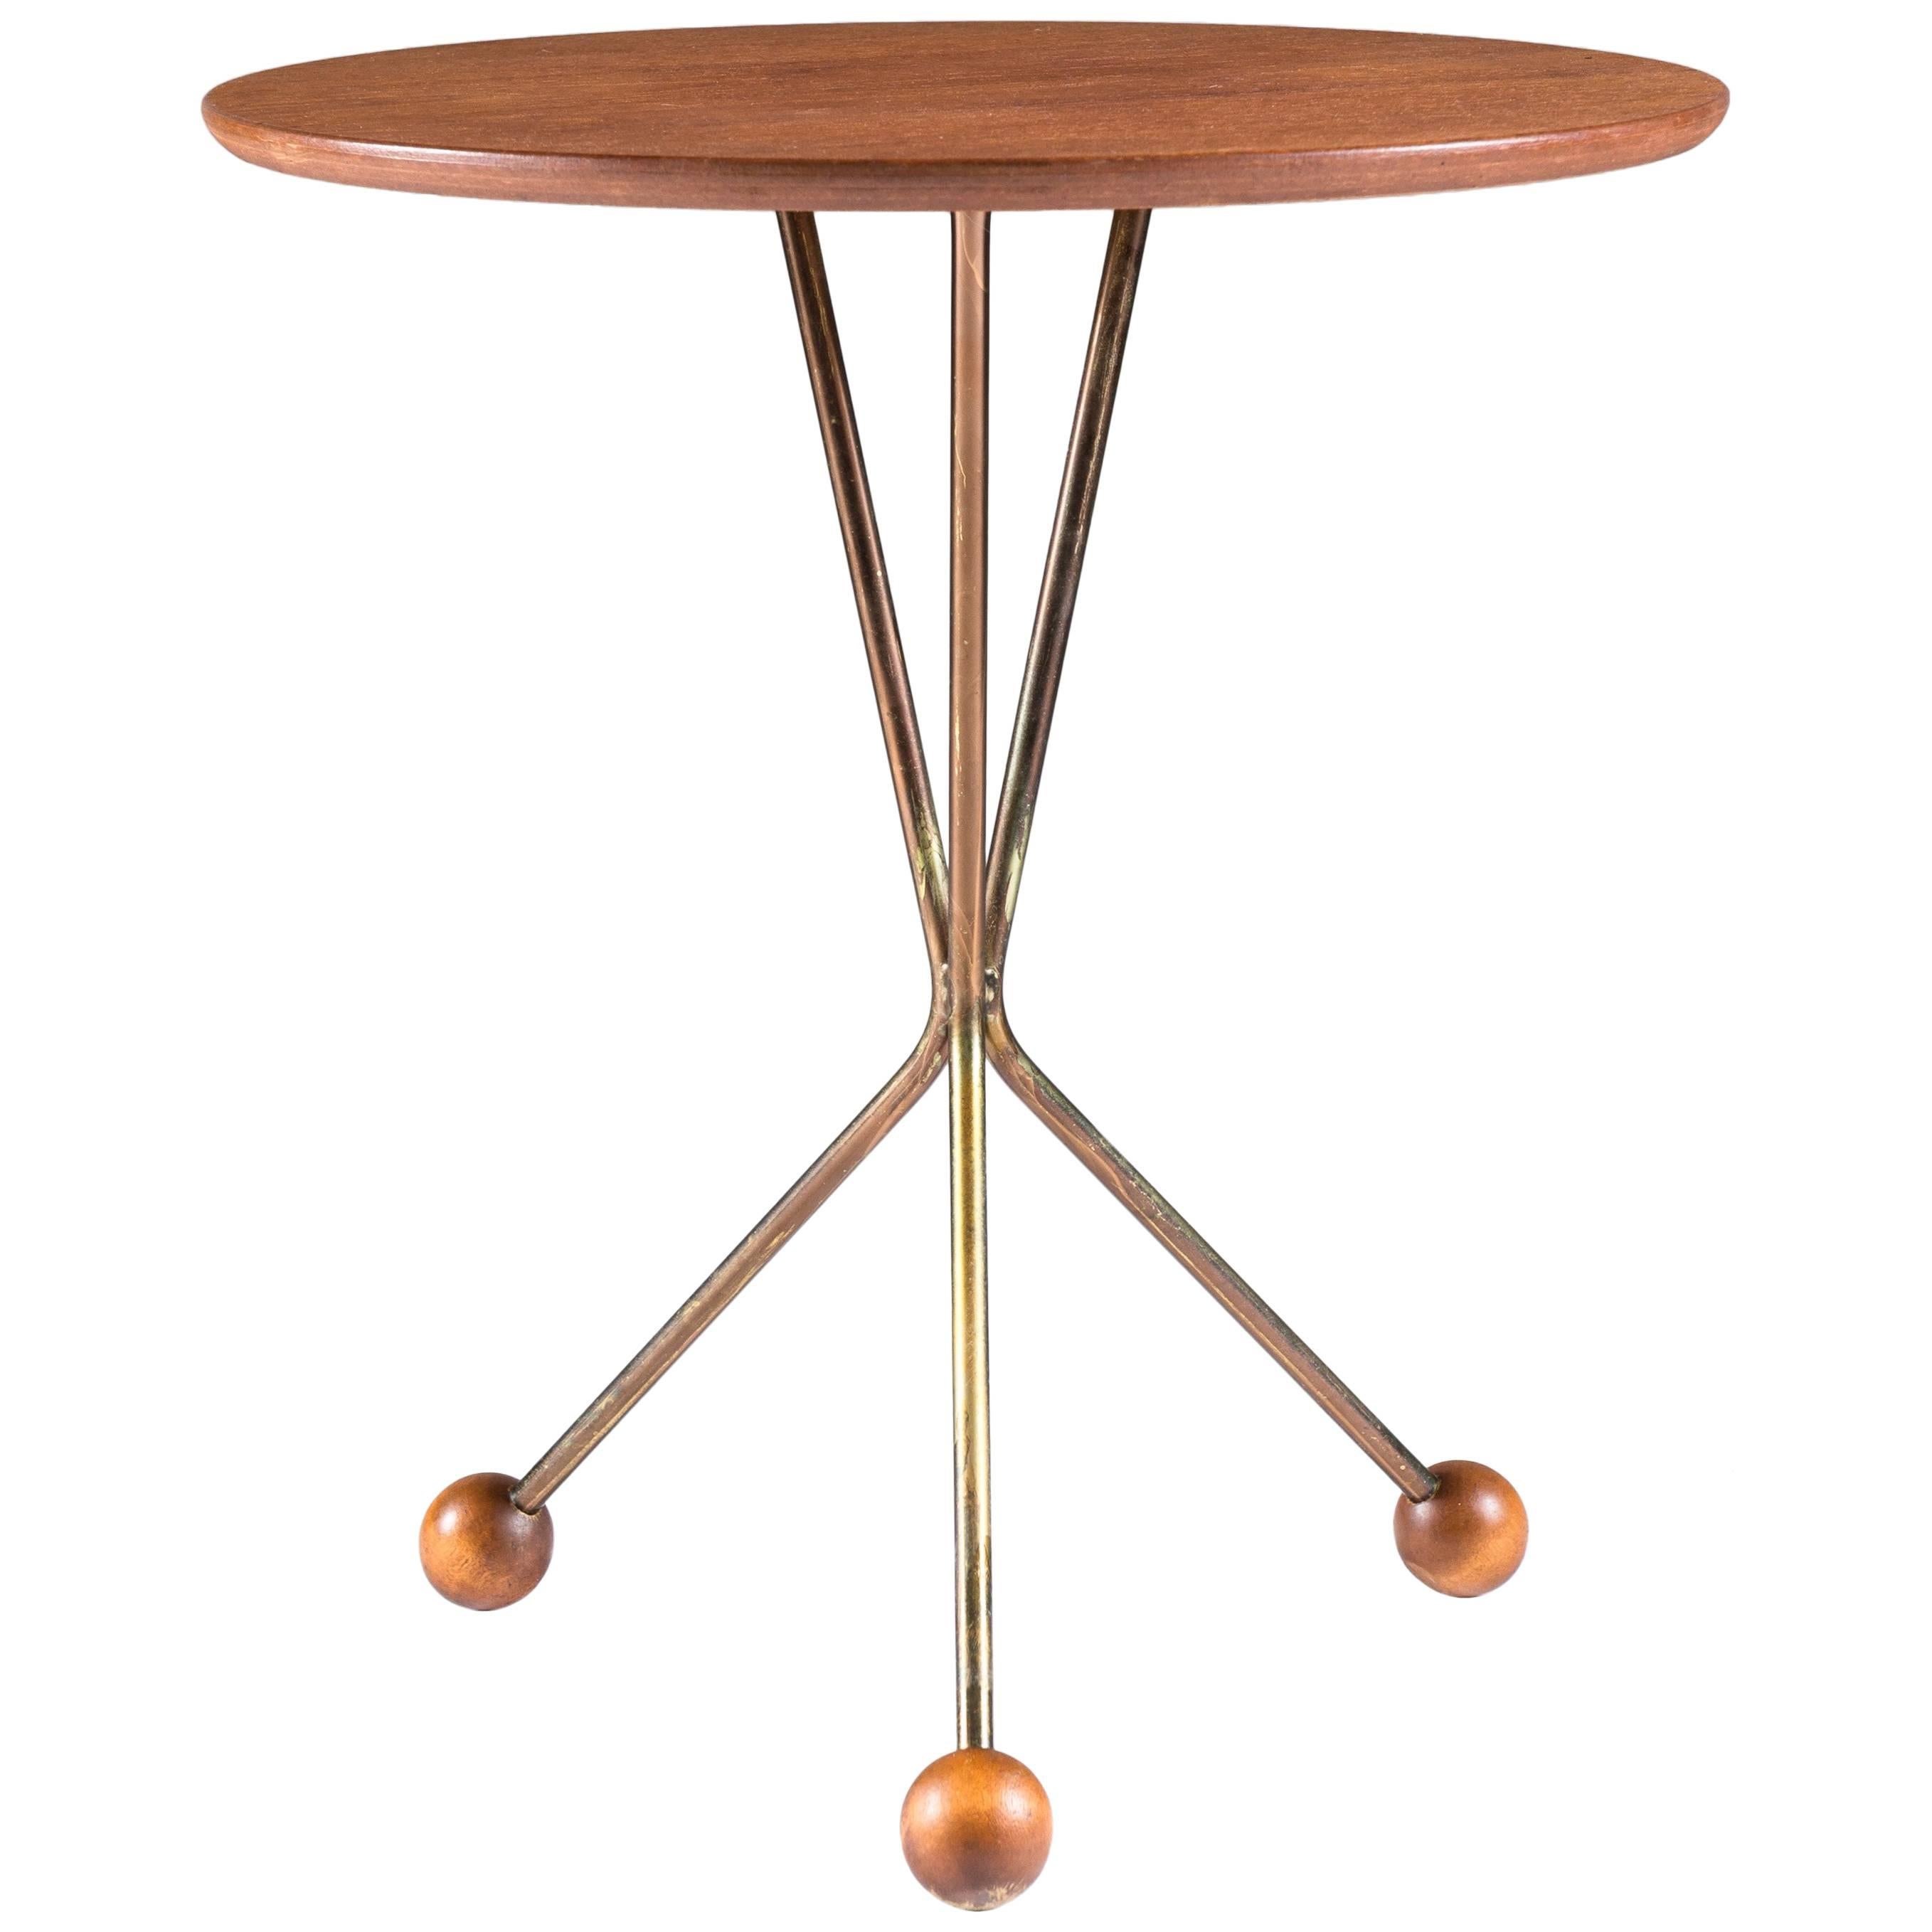 Small Side Table in Brass and Teak, Sweden, 1950s